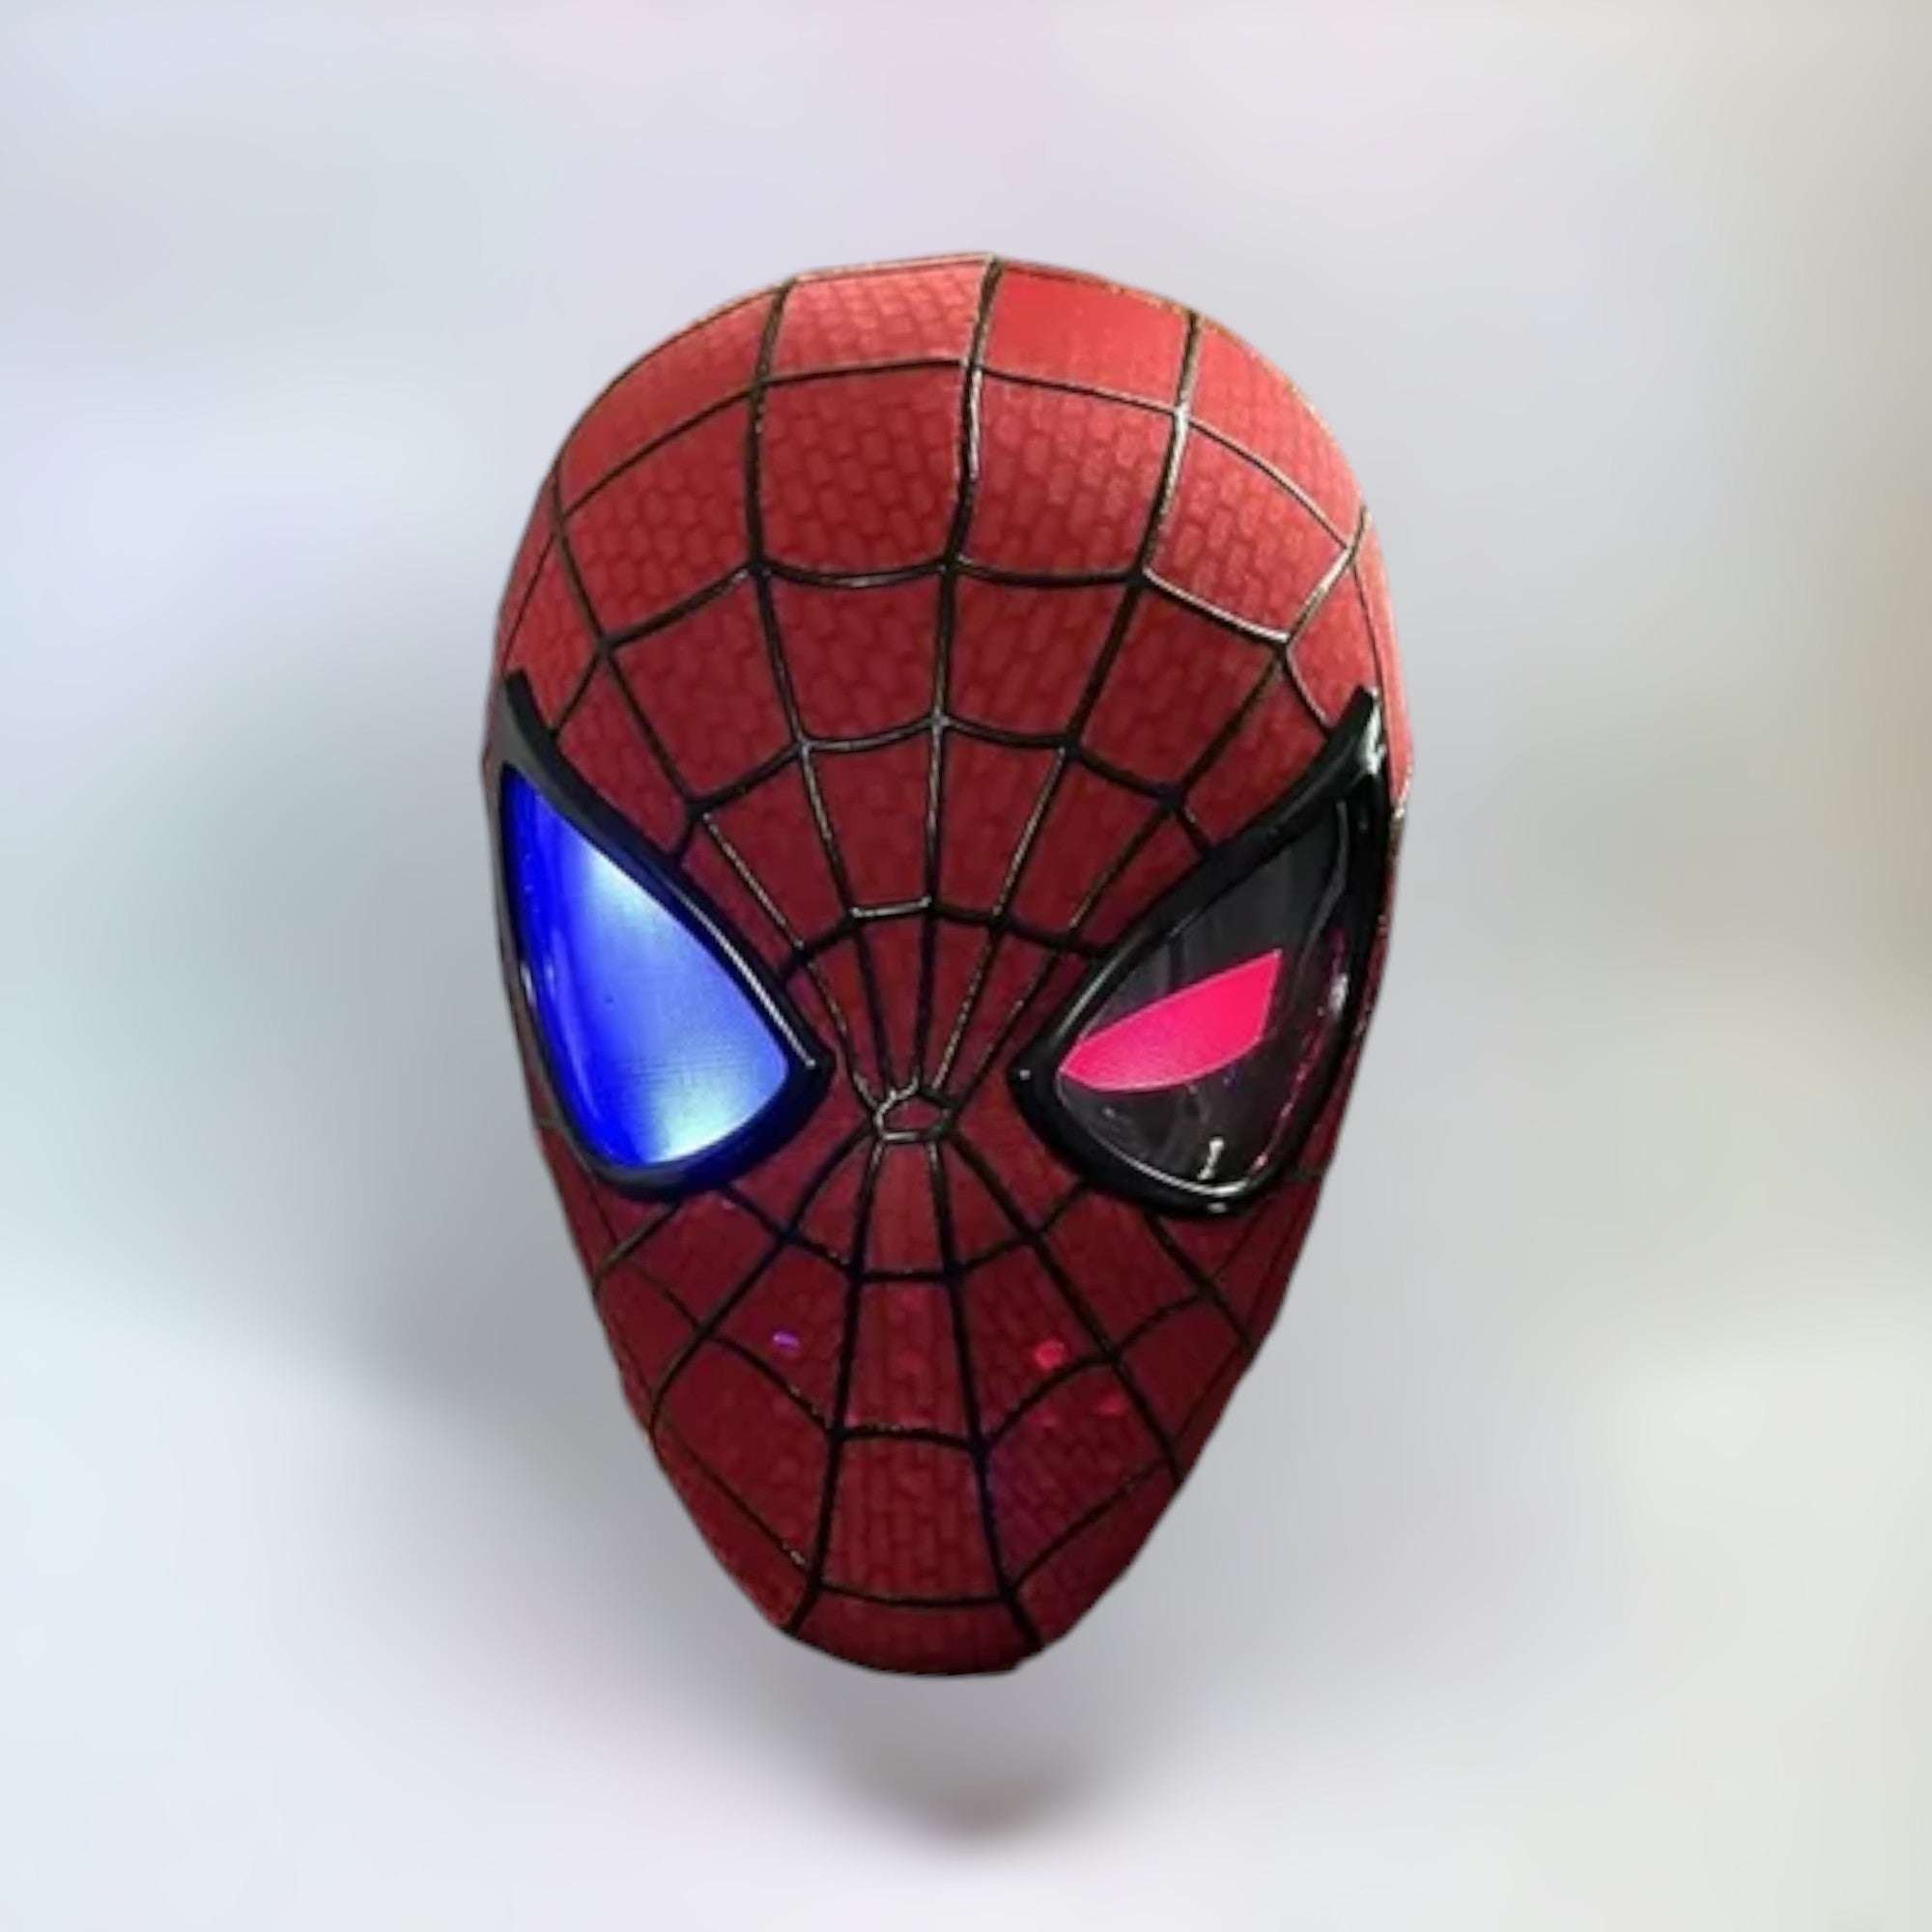 The Amazing Spiderman Mask with Blinking Movable Eyes Remote Controlled and Individually Controlled LED Light Eyes Side View. Spiderman mask with plain white background